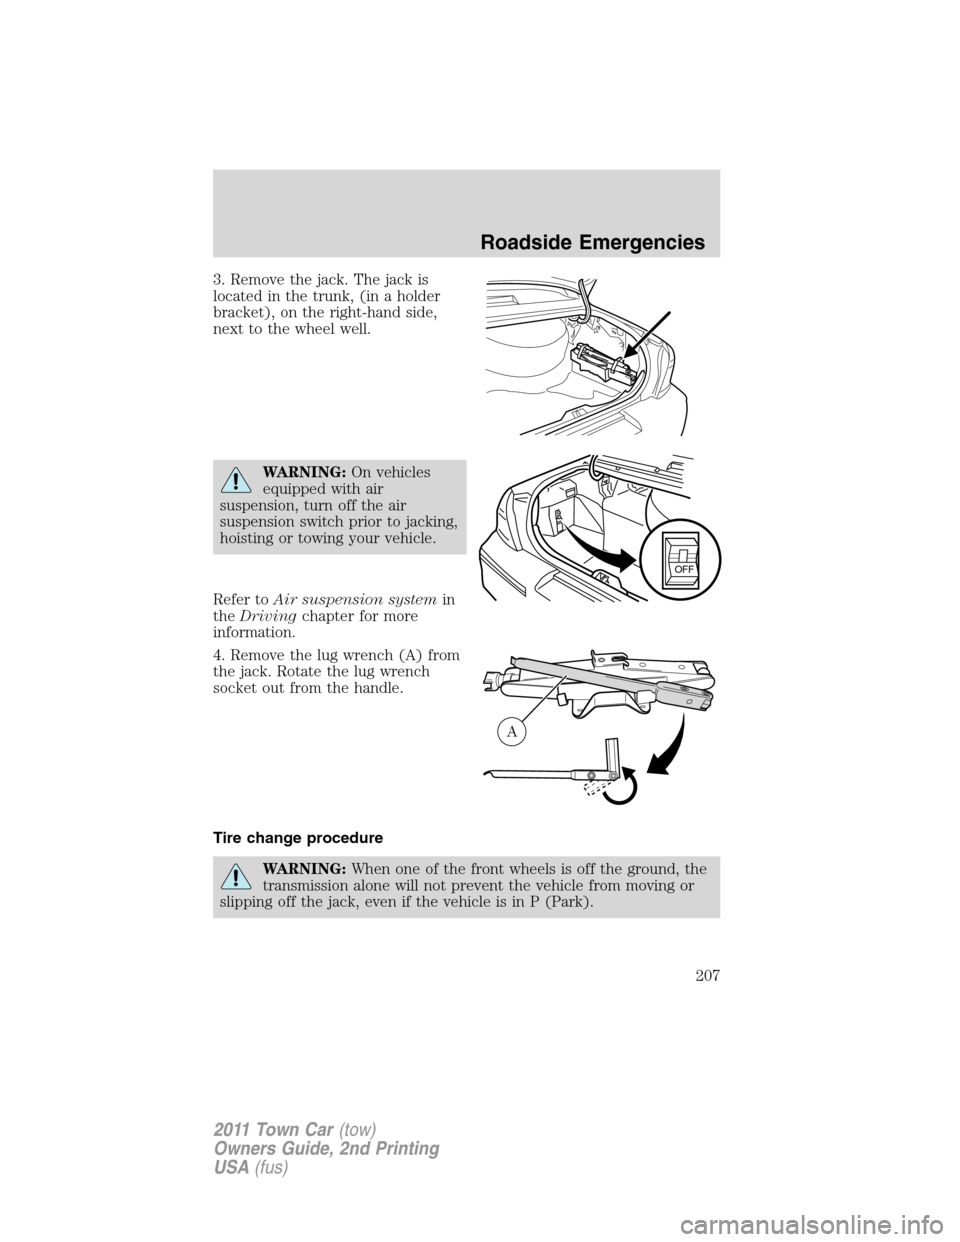 LINCOLN TOWN CAR 2011  Owners Manual 3. Remove the jack. The jack is
located in the trunk, (in a holder
bracket), on the right-hand side,
next to the wheel well.
WARNING:On vehicles
equipped with air
suspension, turn off the air
suspensi